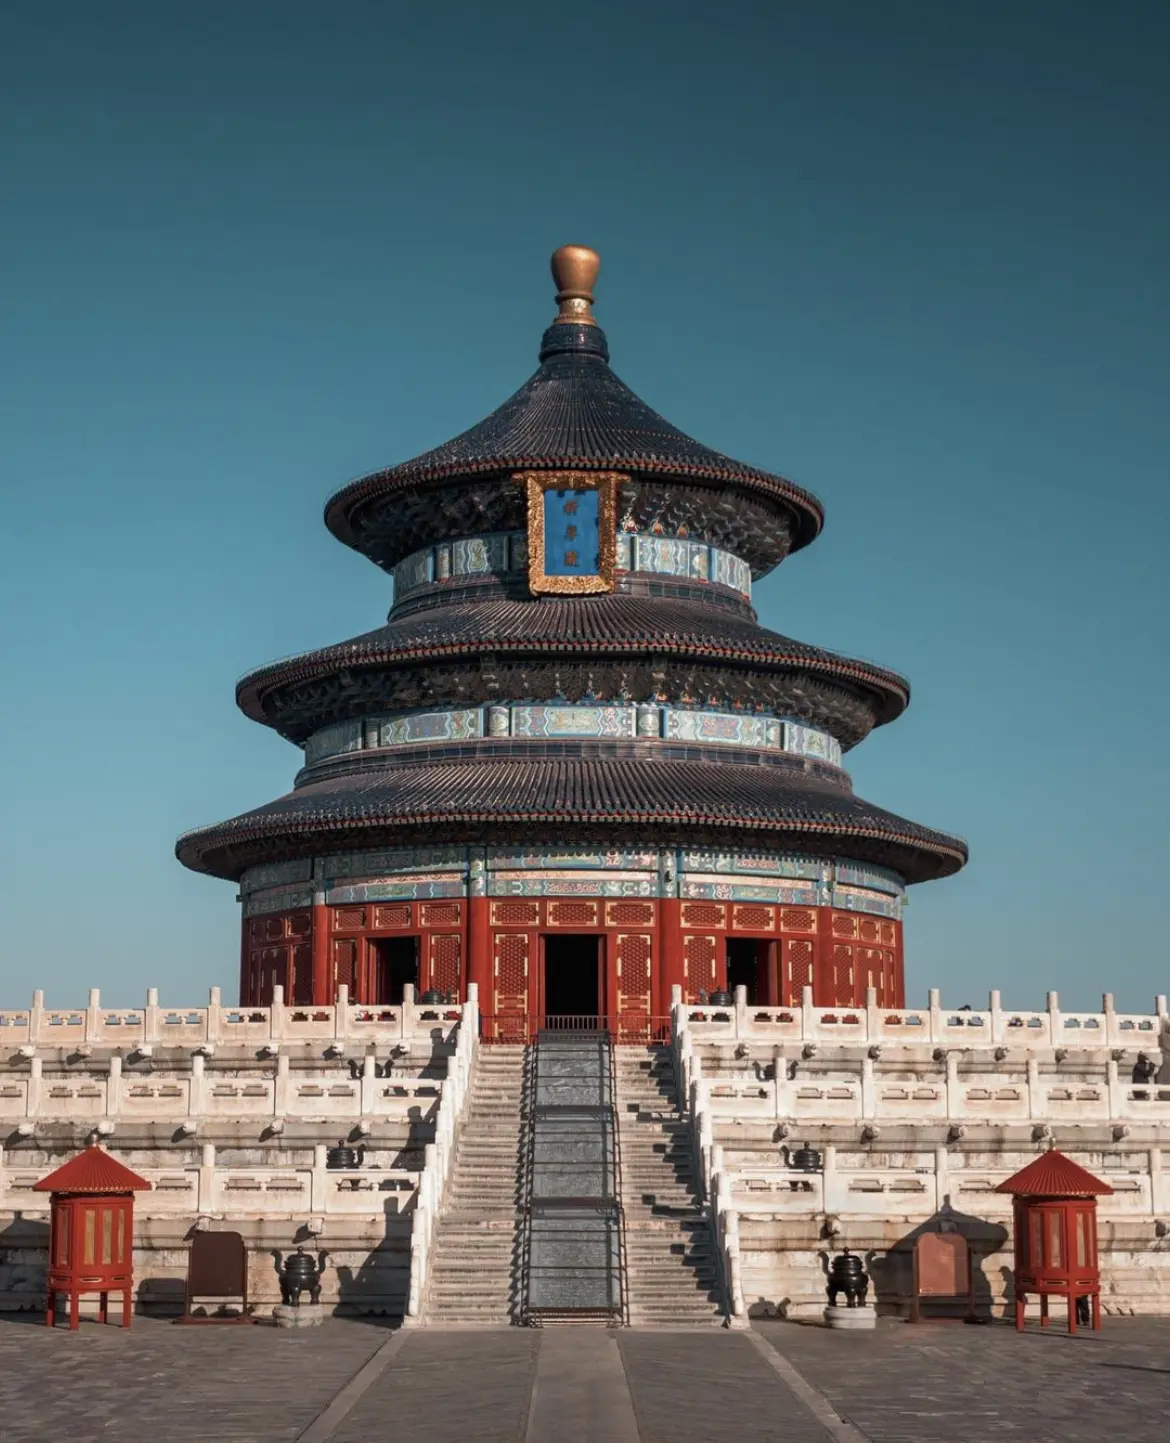 Temple of Heaven - The Top 12 Places To See In Beijing, China